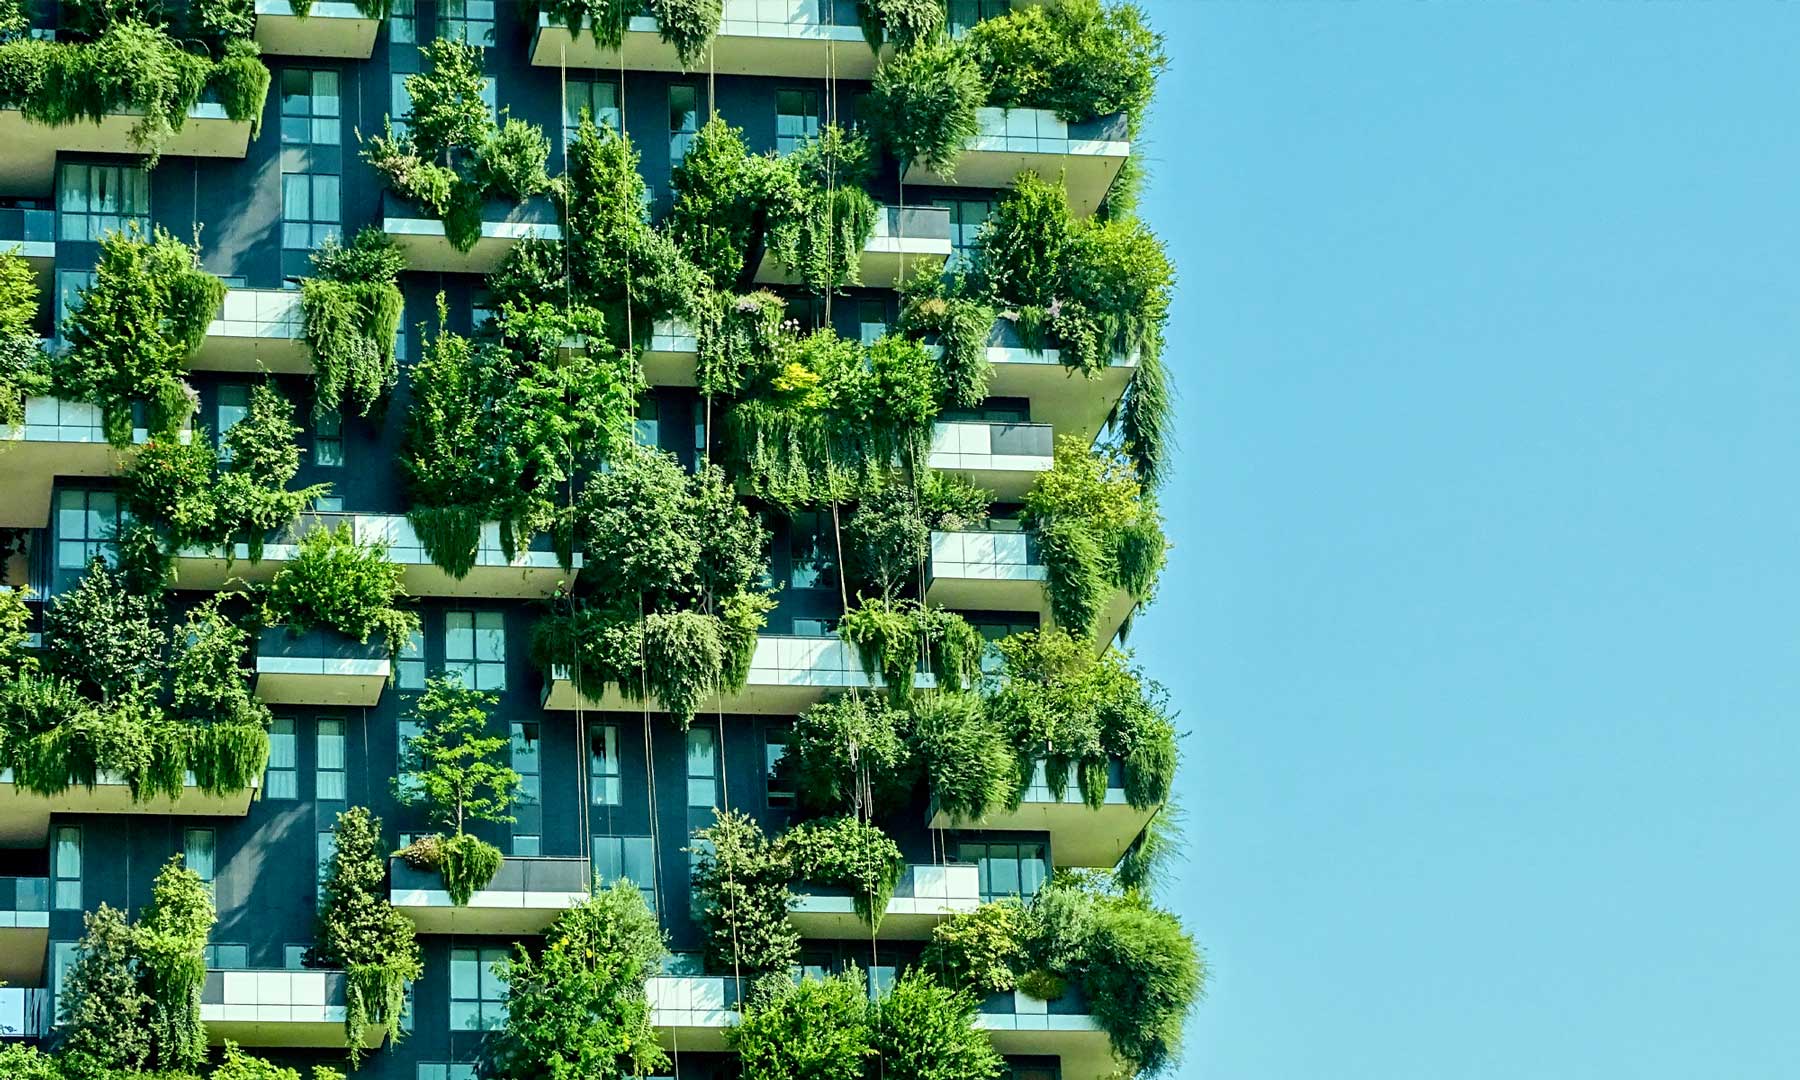 A residential building with green foliage growing on all floors